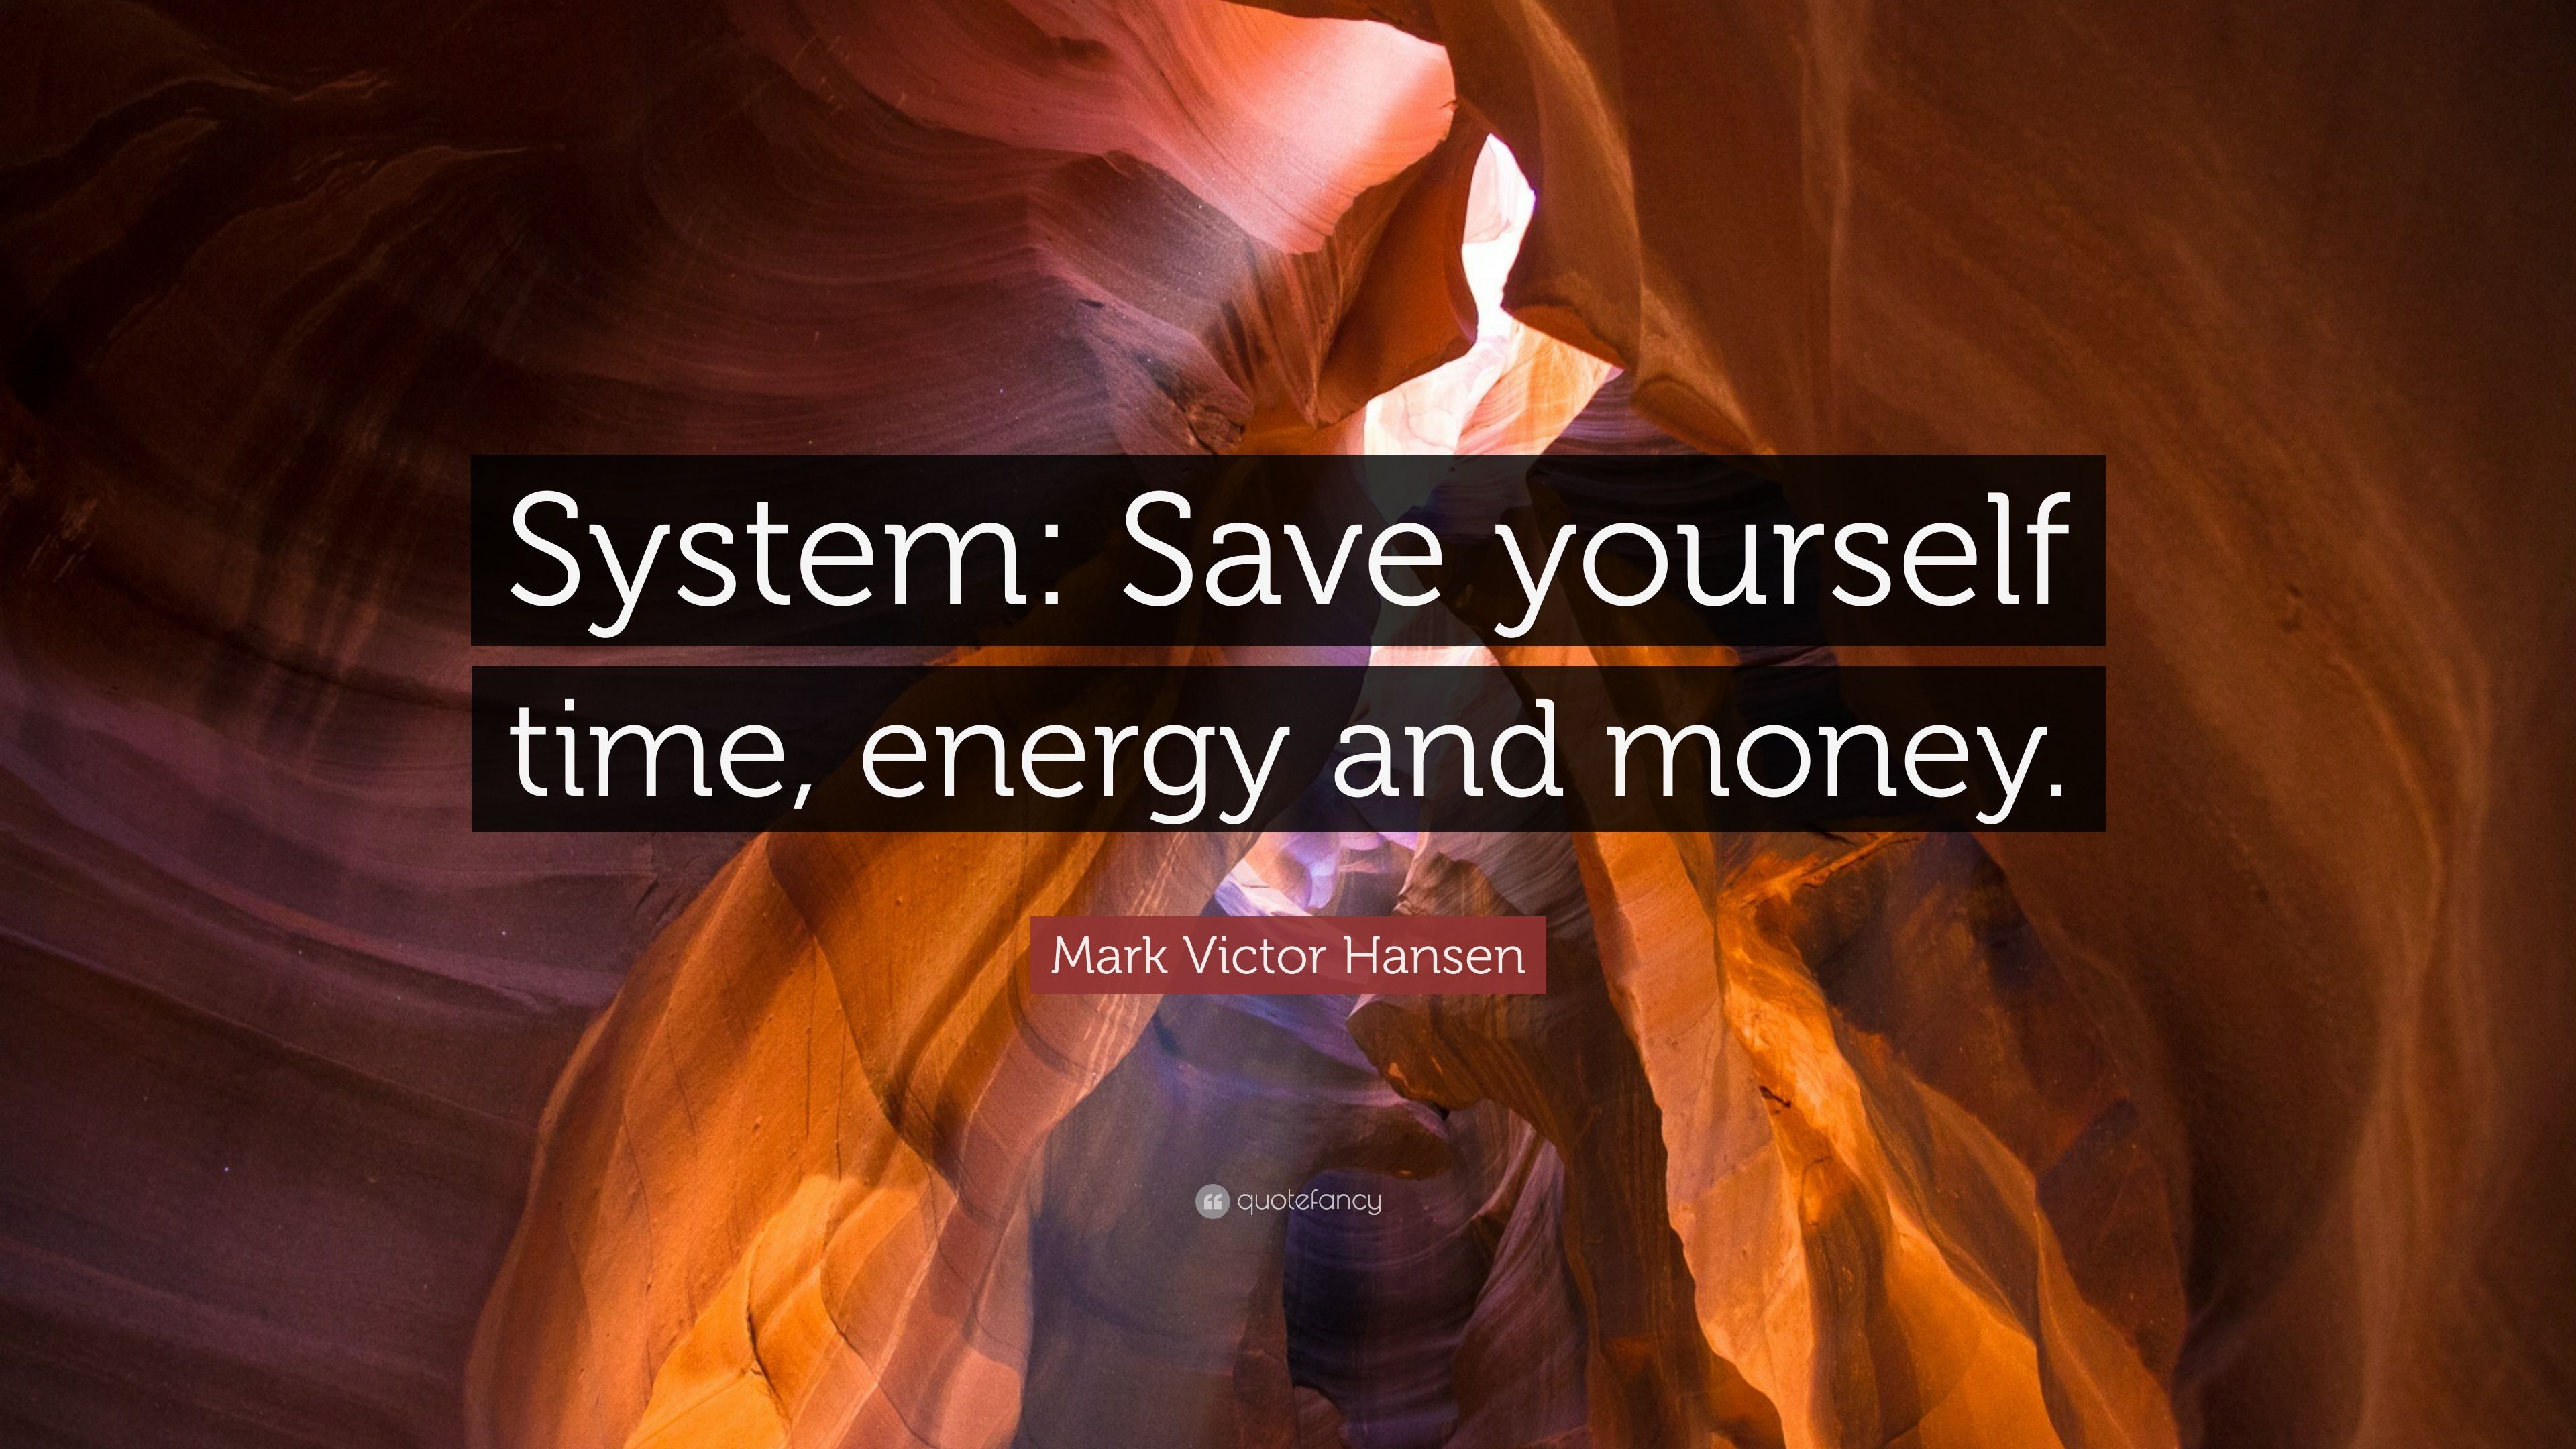 Mark Victor Hansen Quote: “System: Save yourself time, energy and money.” (9 wallpaper)